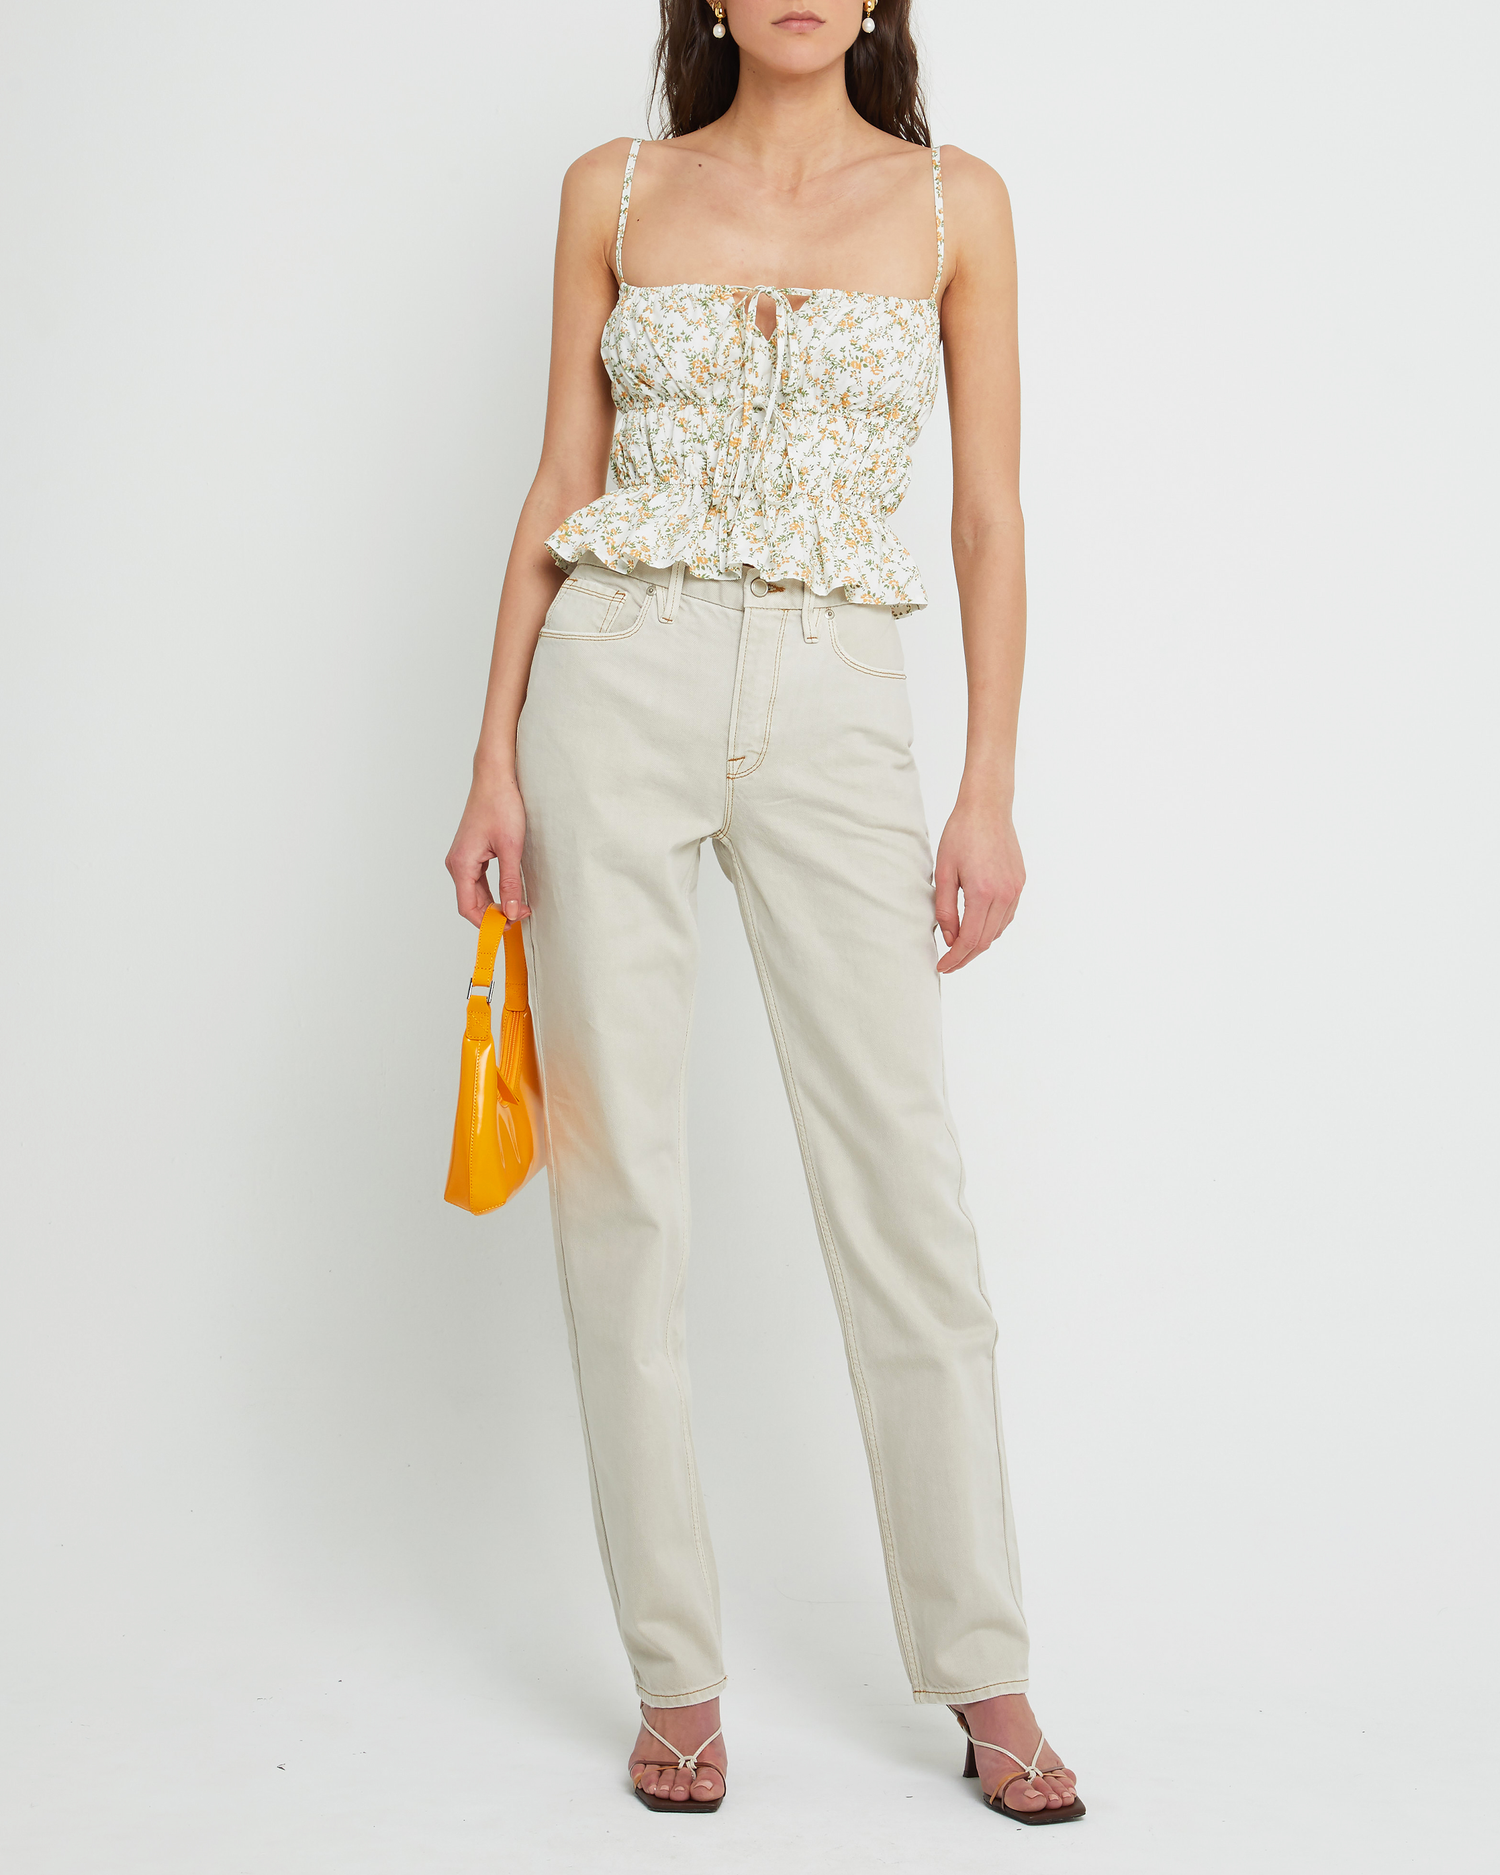 Fifth image of Lulu Top, a floral sleeveless top, ruffled, cinched, front tie, spaghetti strap, cami